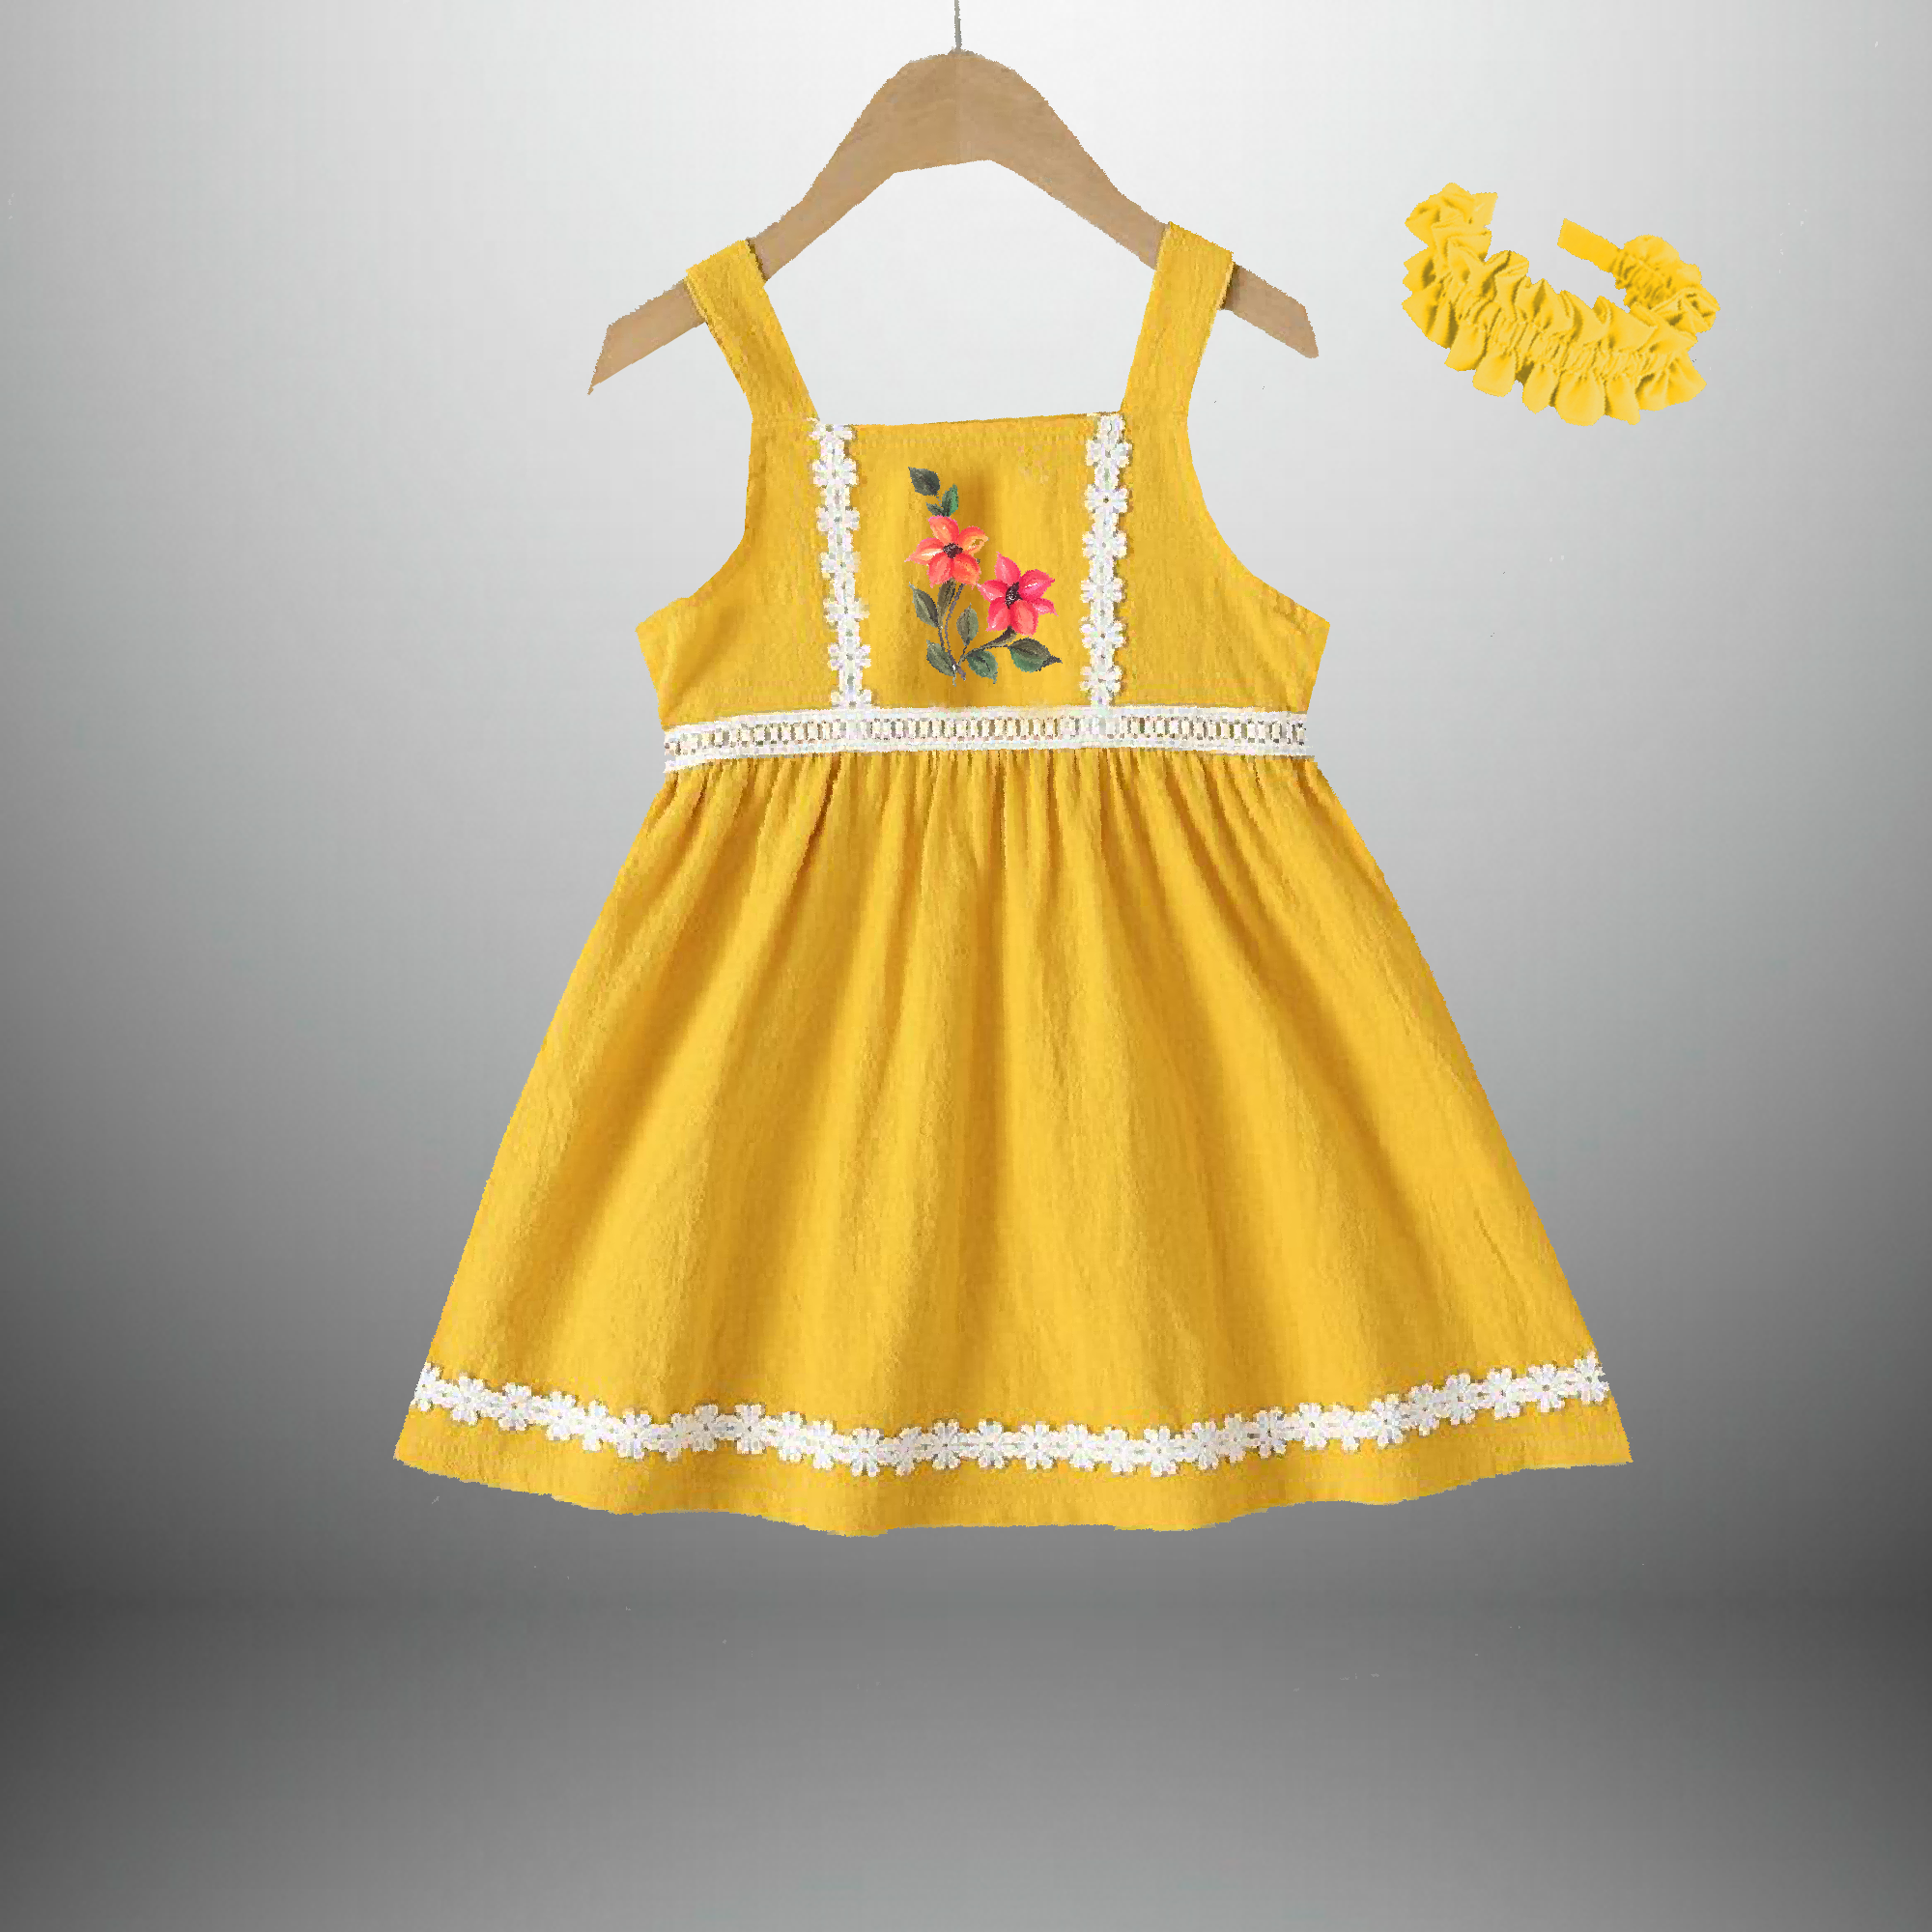 Girl's yellow dress with laces on it -RKFCW413